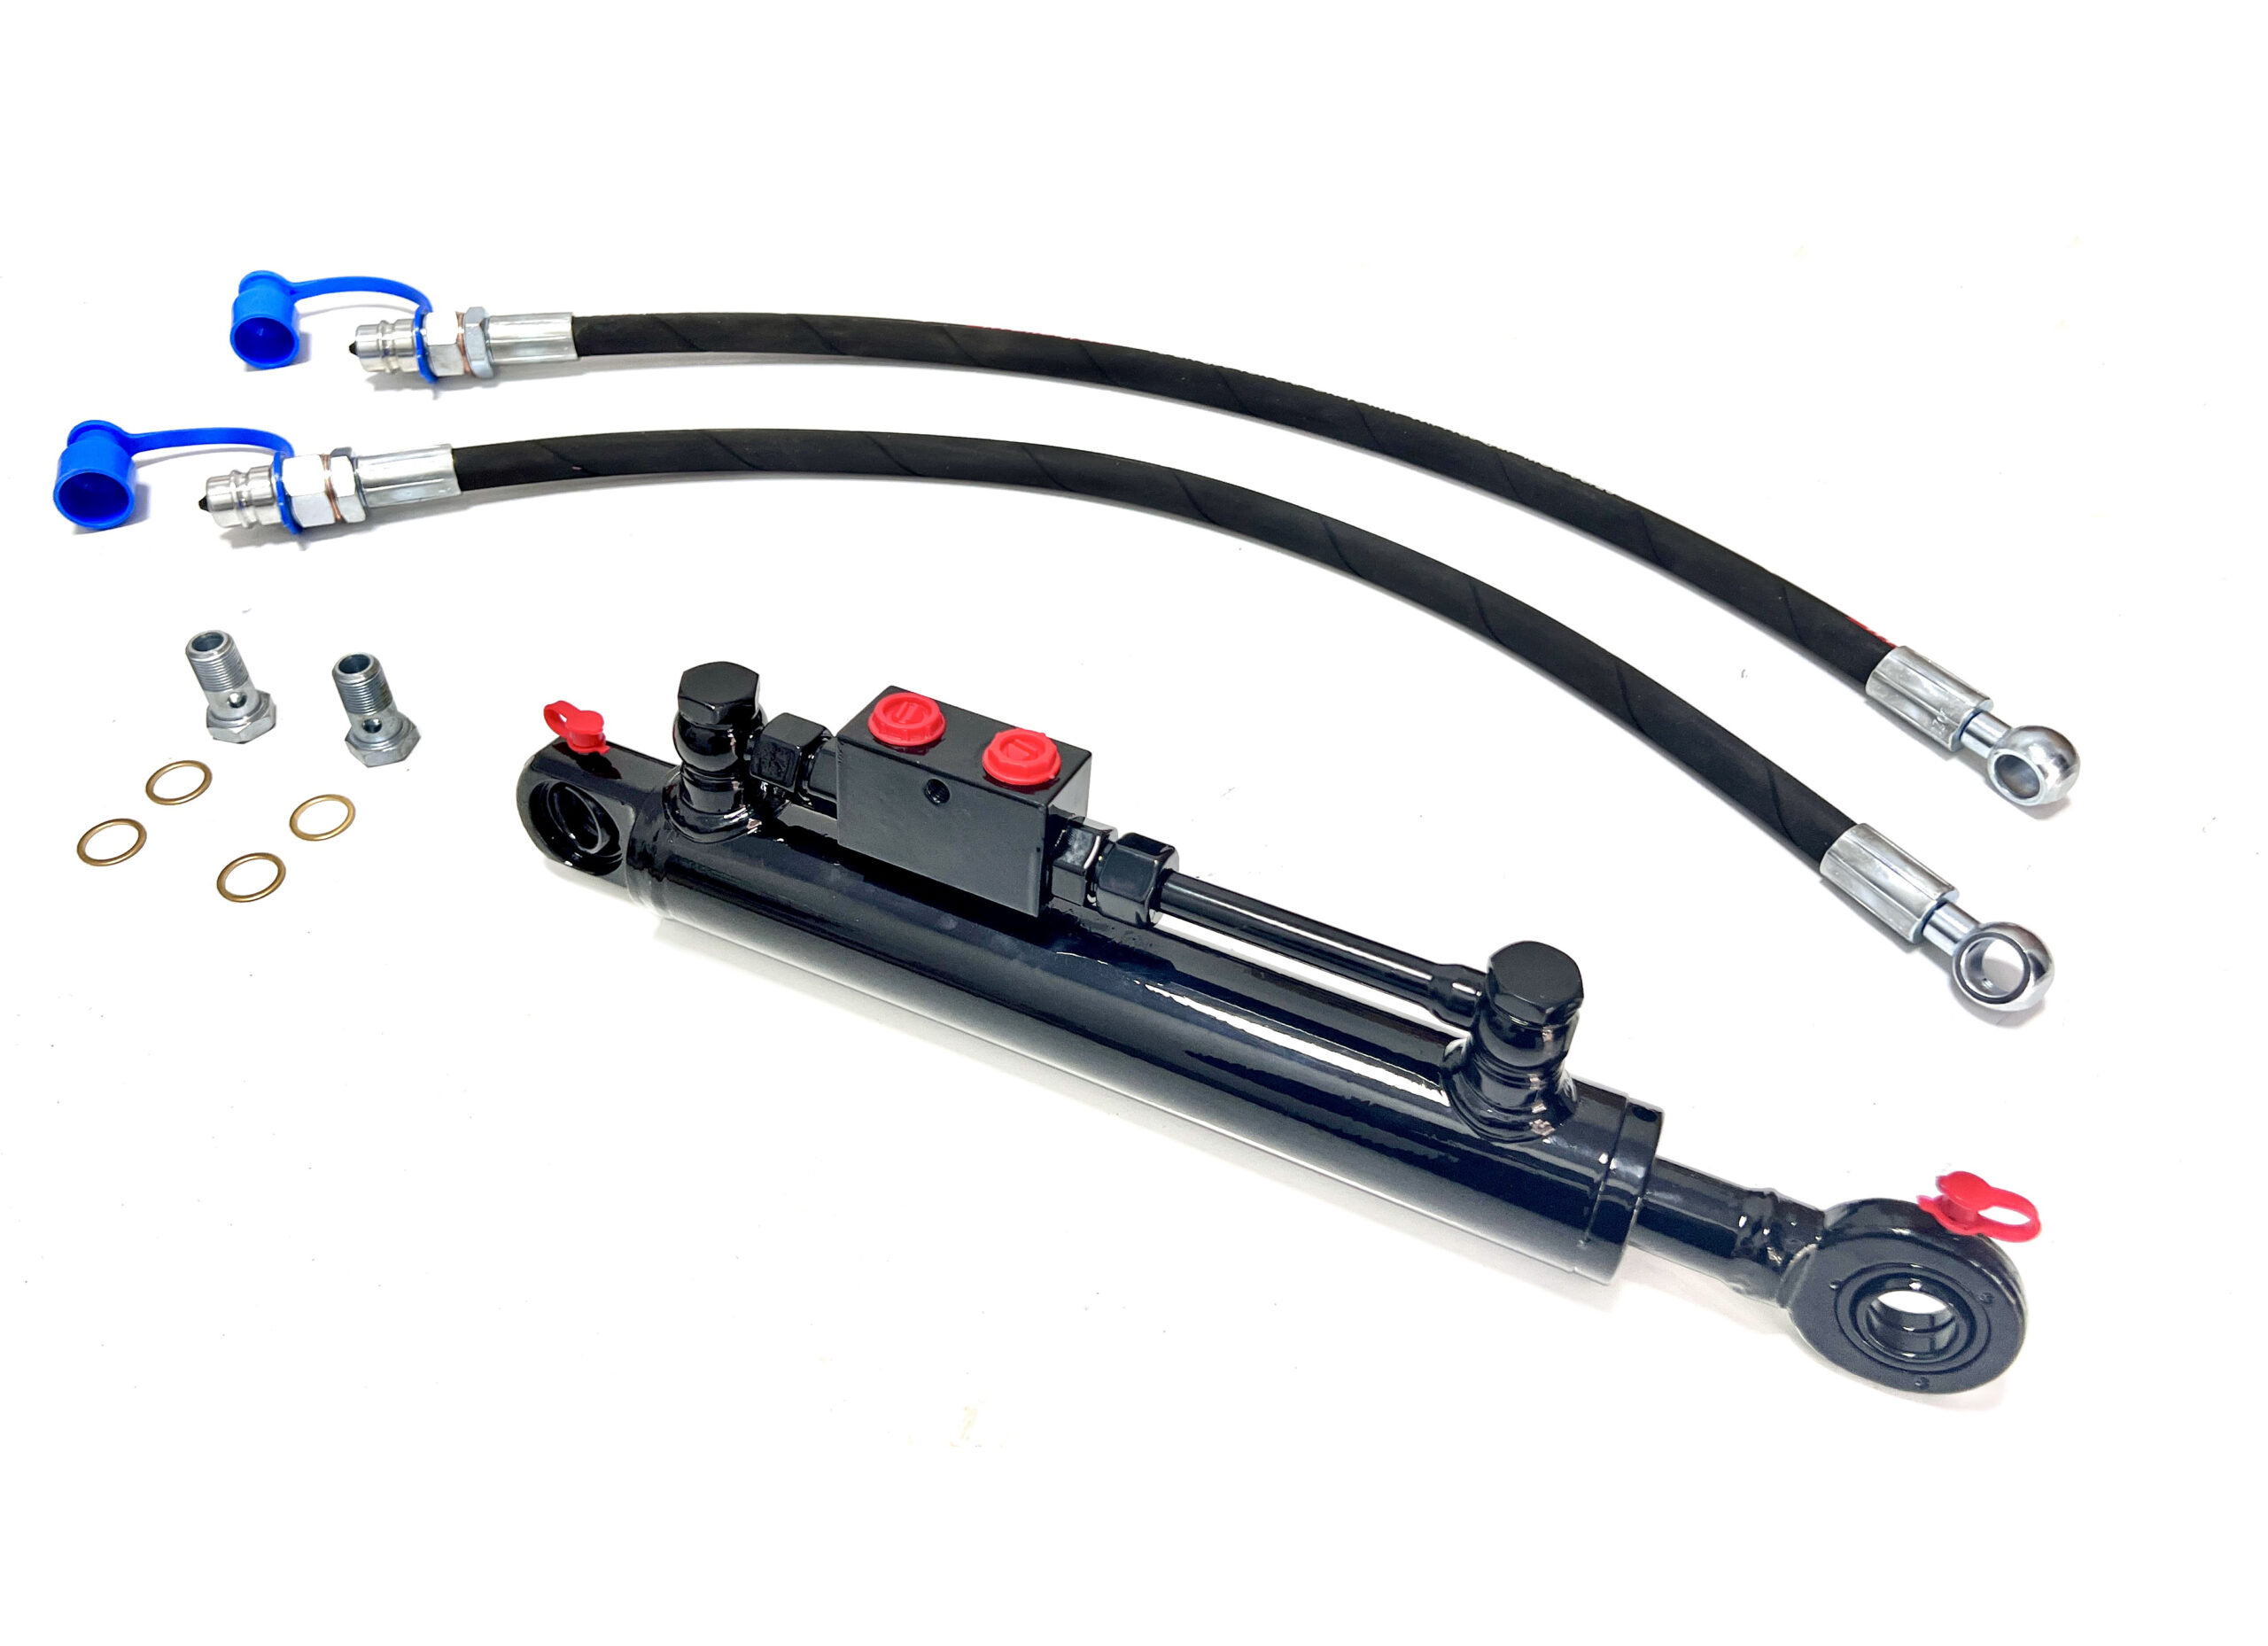 Hydraulic Top Link Cat. 1-1 (16″- 24″) with Locking Block Including 2 Hoses